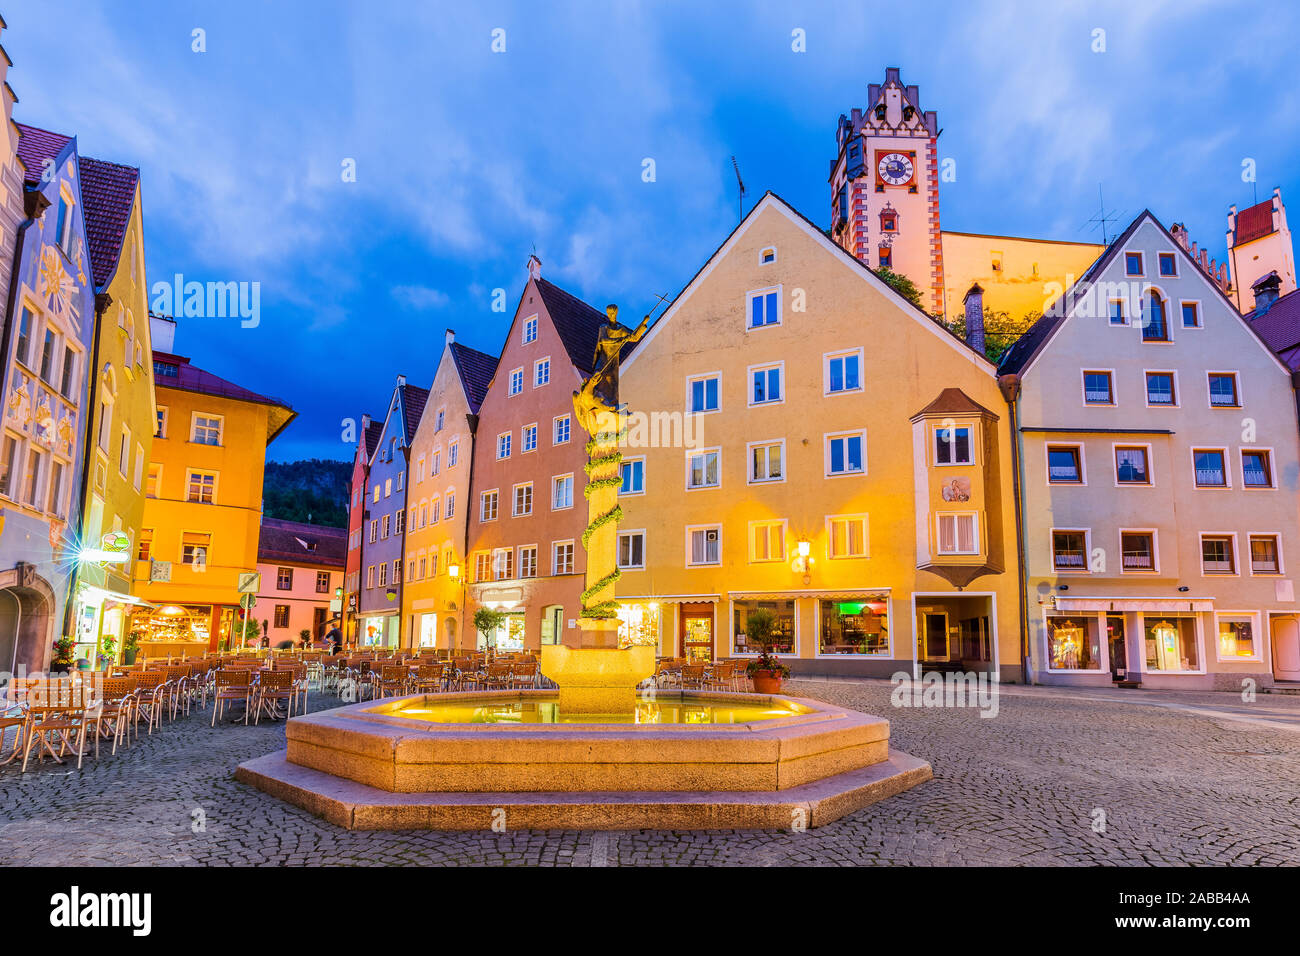 Fussen, Germany. Old townscape at twilight. Stock Photo